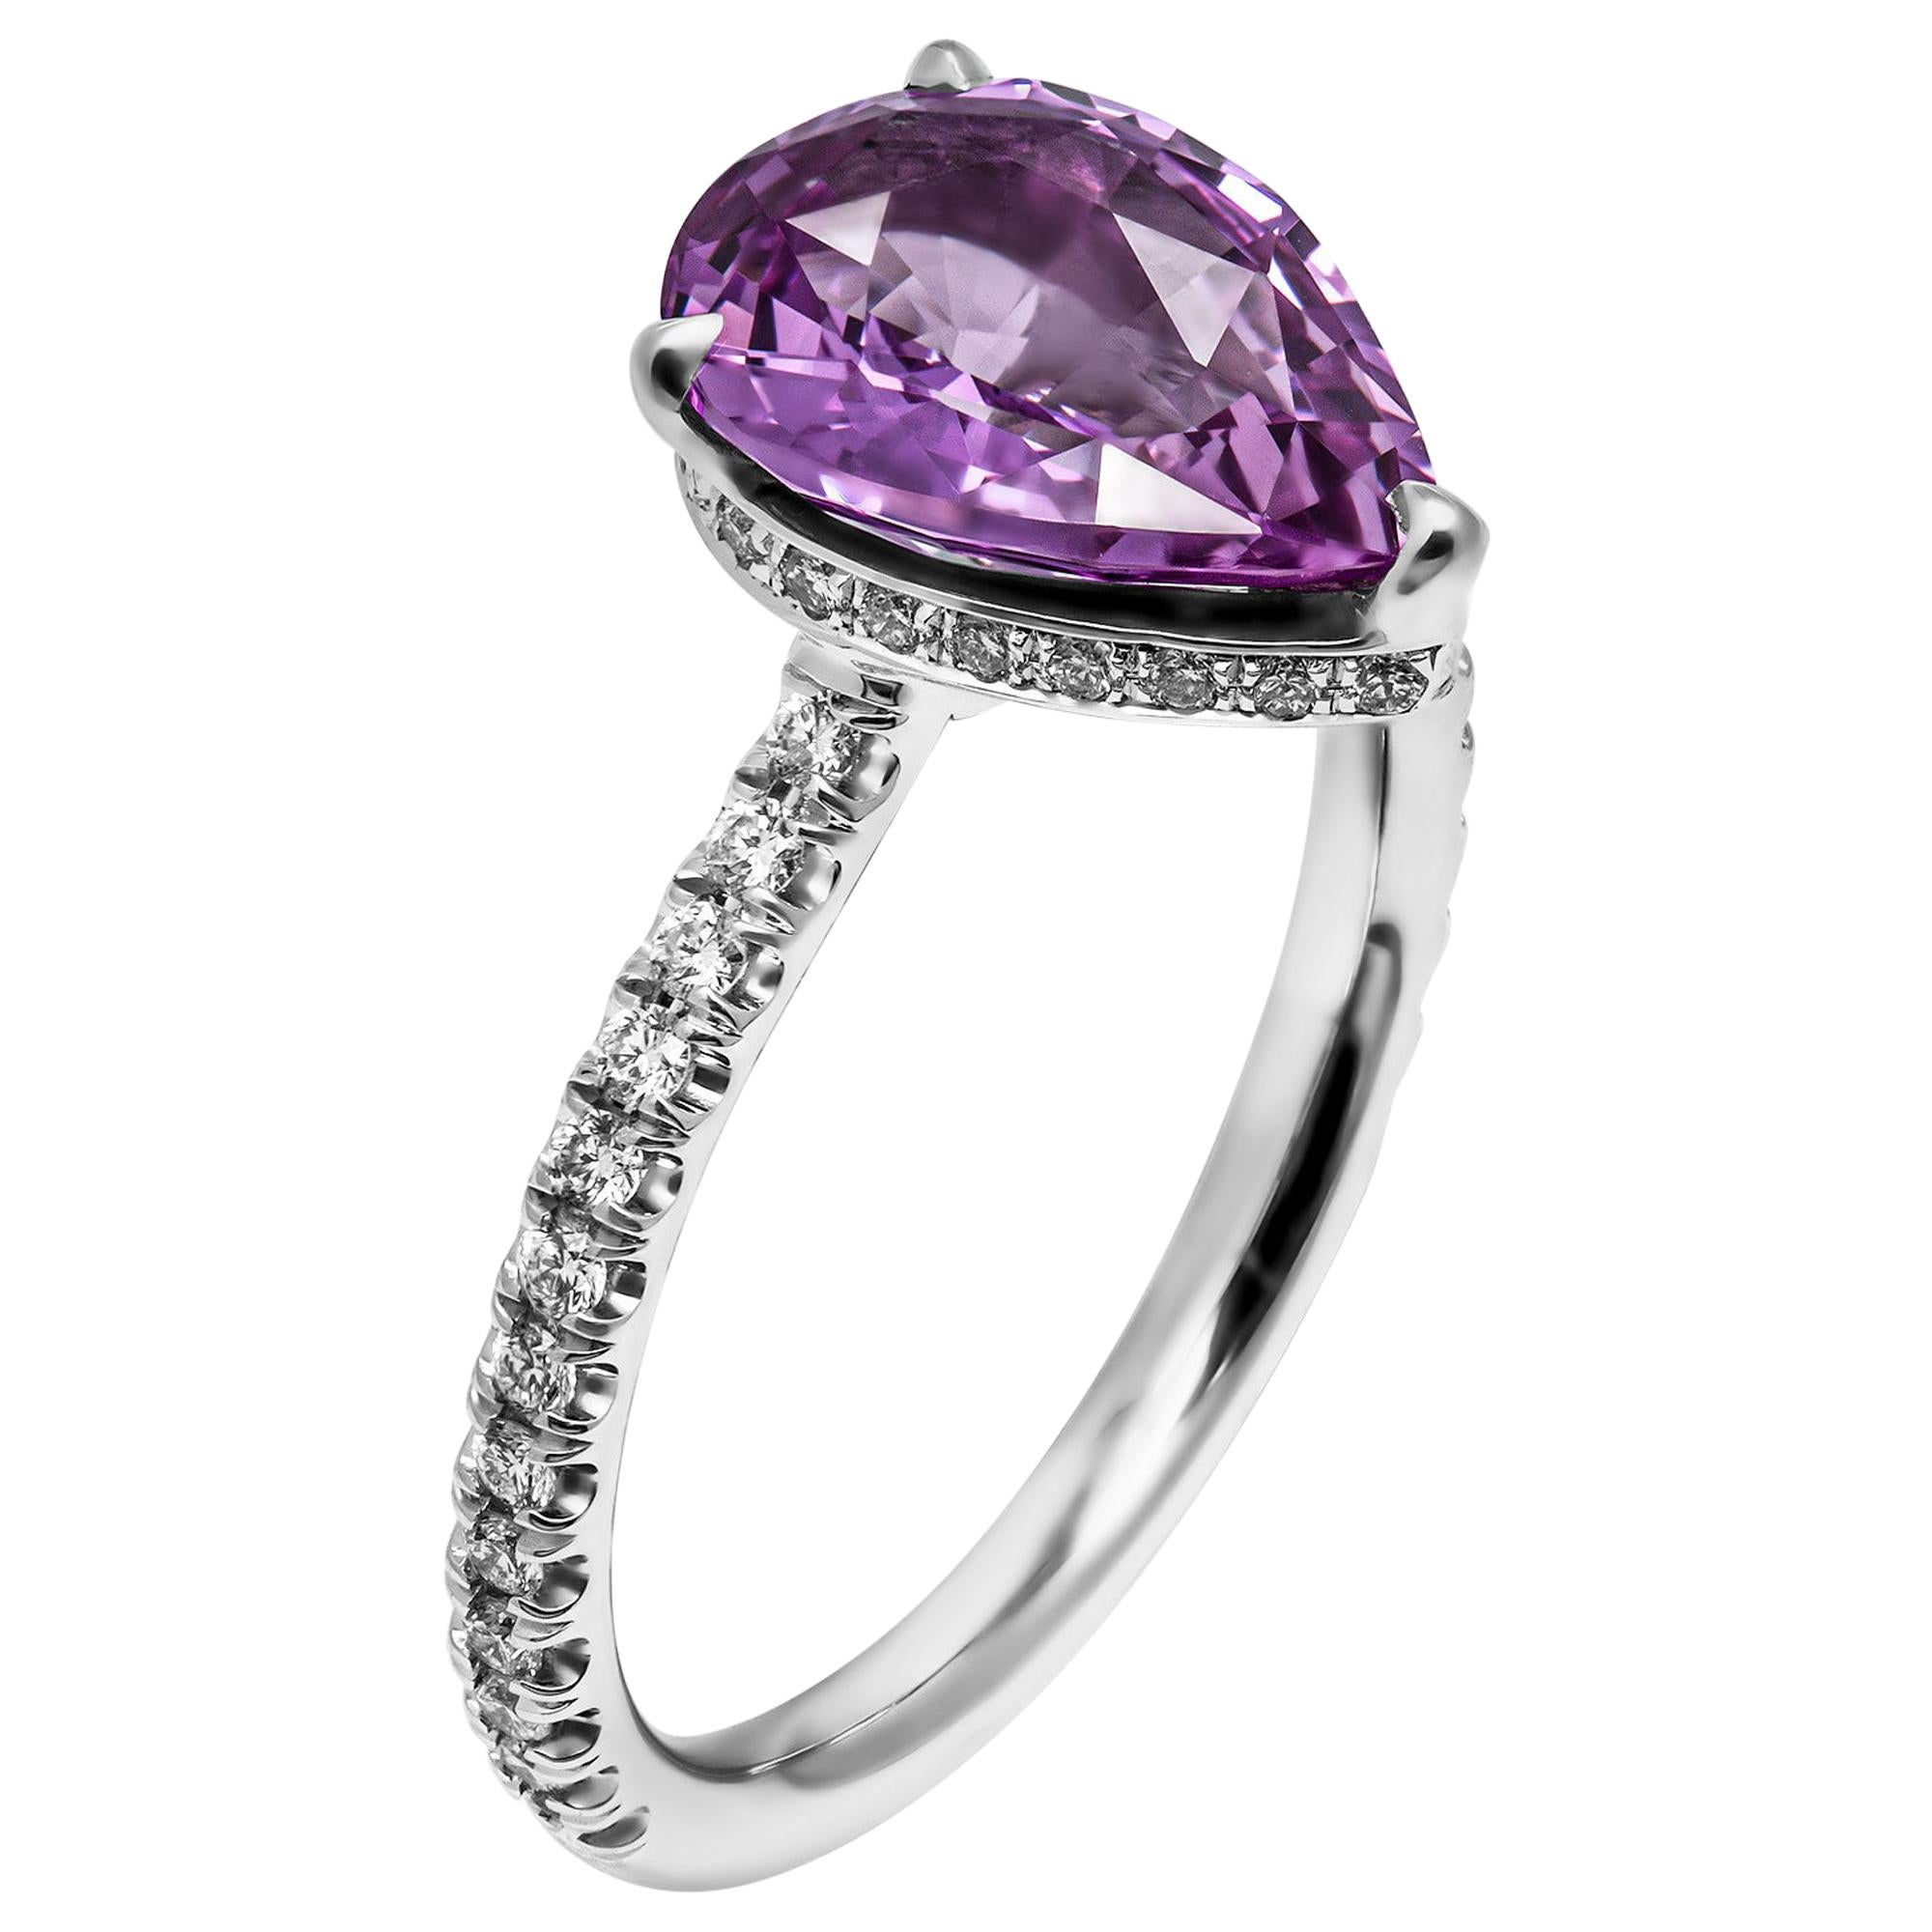 Pear Shaped 2.14 Carat Pink Sapphire Ring